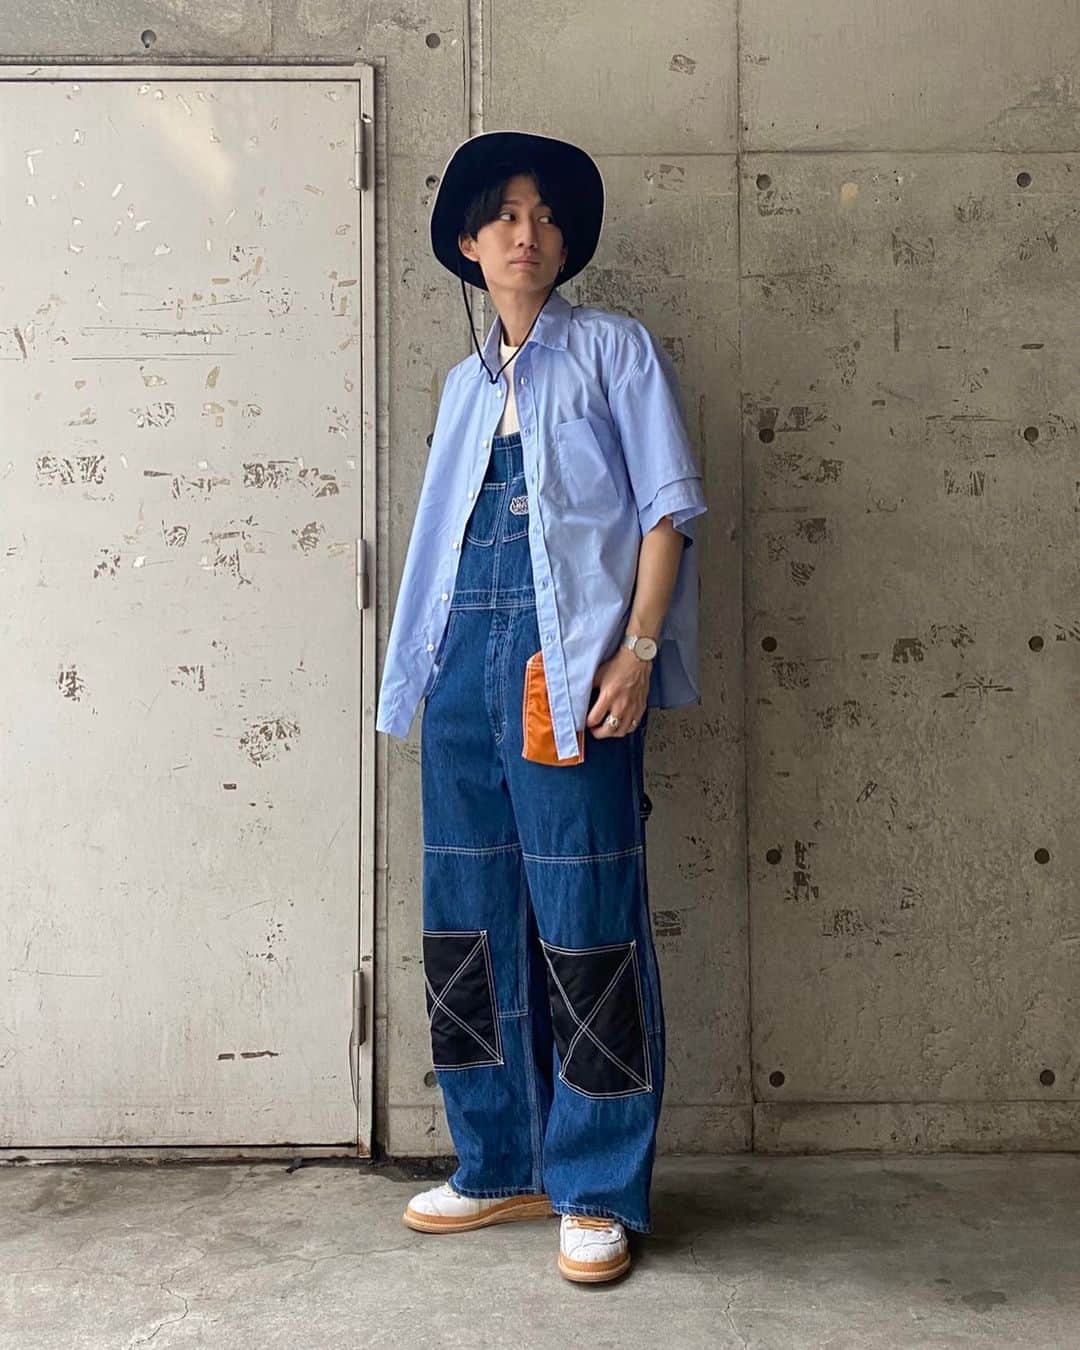 FREAK'S STORE渋谷さんのインスタグラム写真 - (FREAK'S STORE渋谷Instagram)「【Men's Styling】﻿ ﻿ 遊び心満点のオーバーオールを綺麗なアイテムとミックス﻿ ﻿ ［item］﻿ SPECIAL BIG SHIRT﻿ No. 105-690-0001-0﻿ ¥22,000+tax(30%off)/﻿ @name._official  color: ホワイト, サックス, ベージュ﻿ size: 1, 2﻿ ﻿ 別注オーバーオール﻿ No. 149-439-0001-0﻿ ¥28,000+tax/﻿ @mr.pigu @chahchah_tokyo @leejeans  color: インディゴ﻿ size: M, L﻿ ﻿ WHITE PATCH WORK﻿ No. 171-799-0004-0﻿ ¥82,000+tax/﻿ @petersonstoop  color: ホワイト﻿ size: 26.0, 27.0, 28.0(cm)﻿ ﻿ model: nanjo(180cm)﻿ ﻿ #freaksstore #freaksstore_shibuya #freaksstore20ss #tenbox #chahchah #leepipes #name」6月29日 10時21分 - freaksstore_shibuya